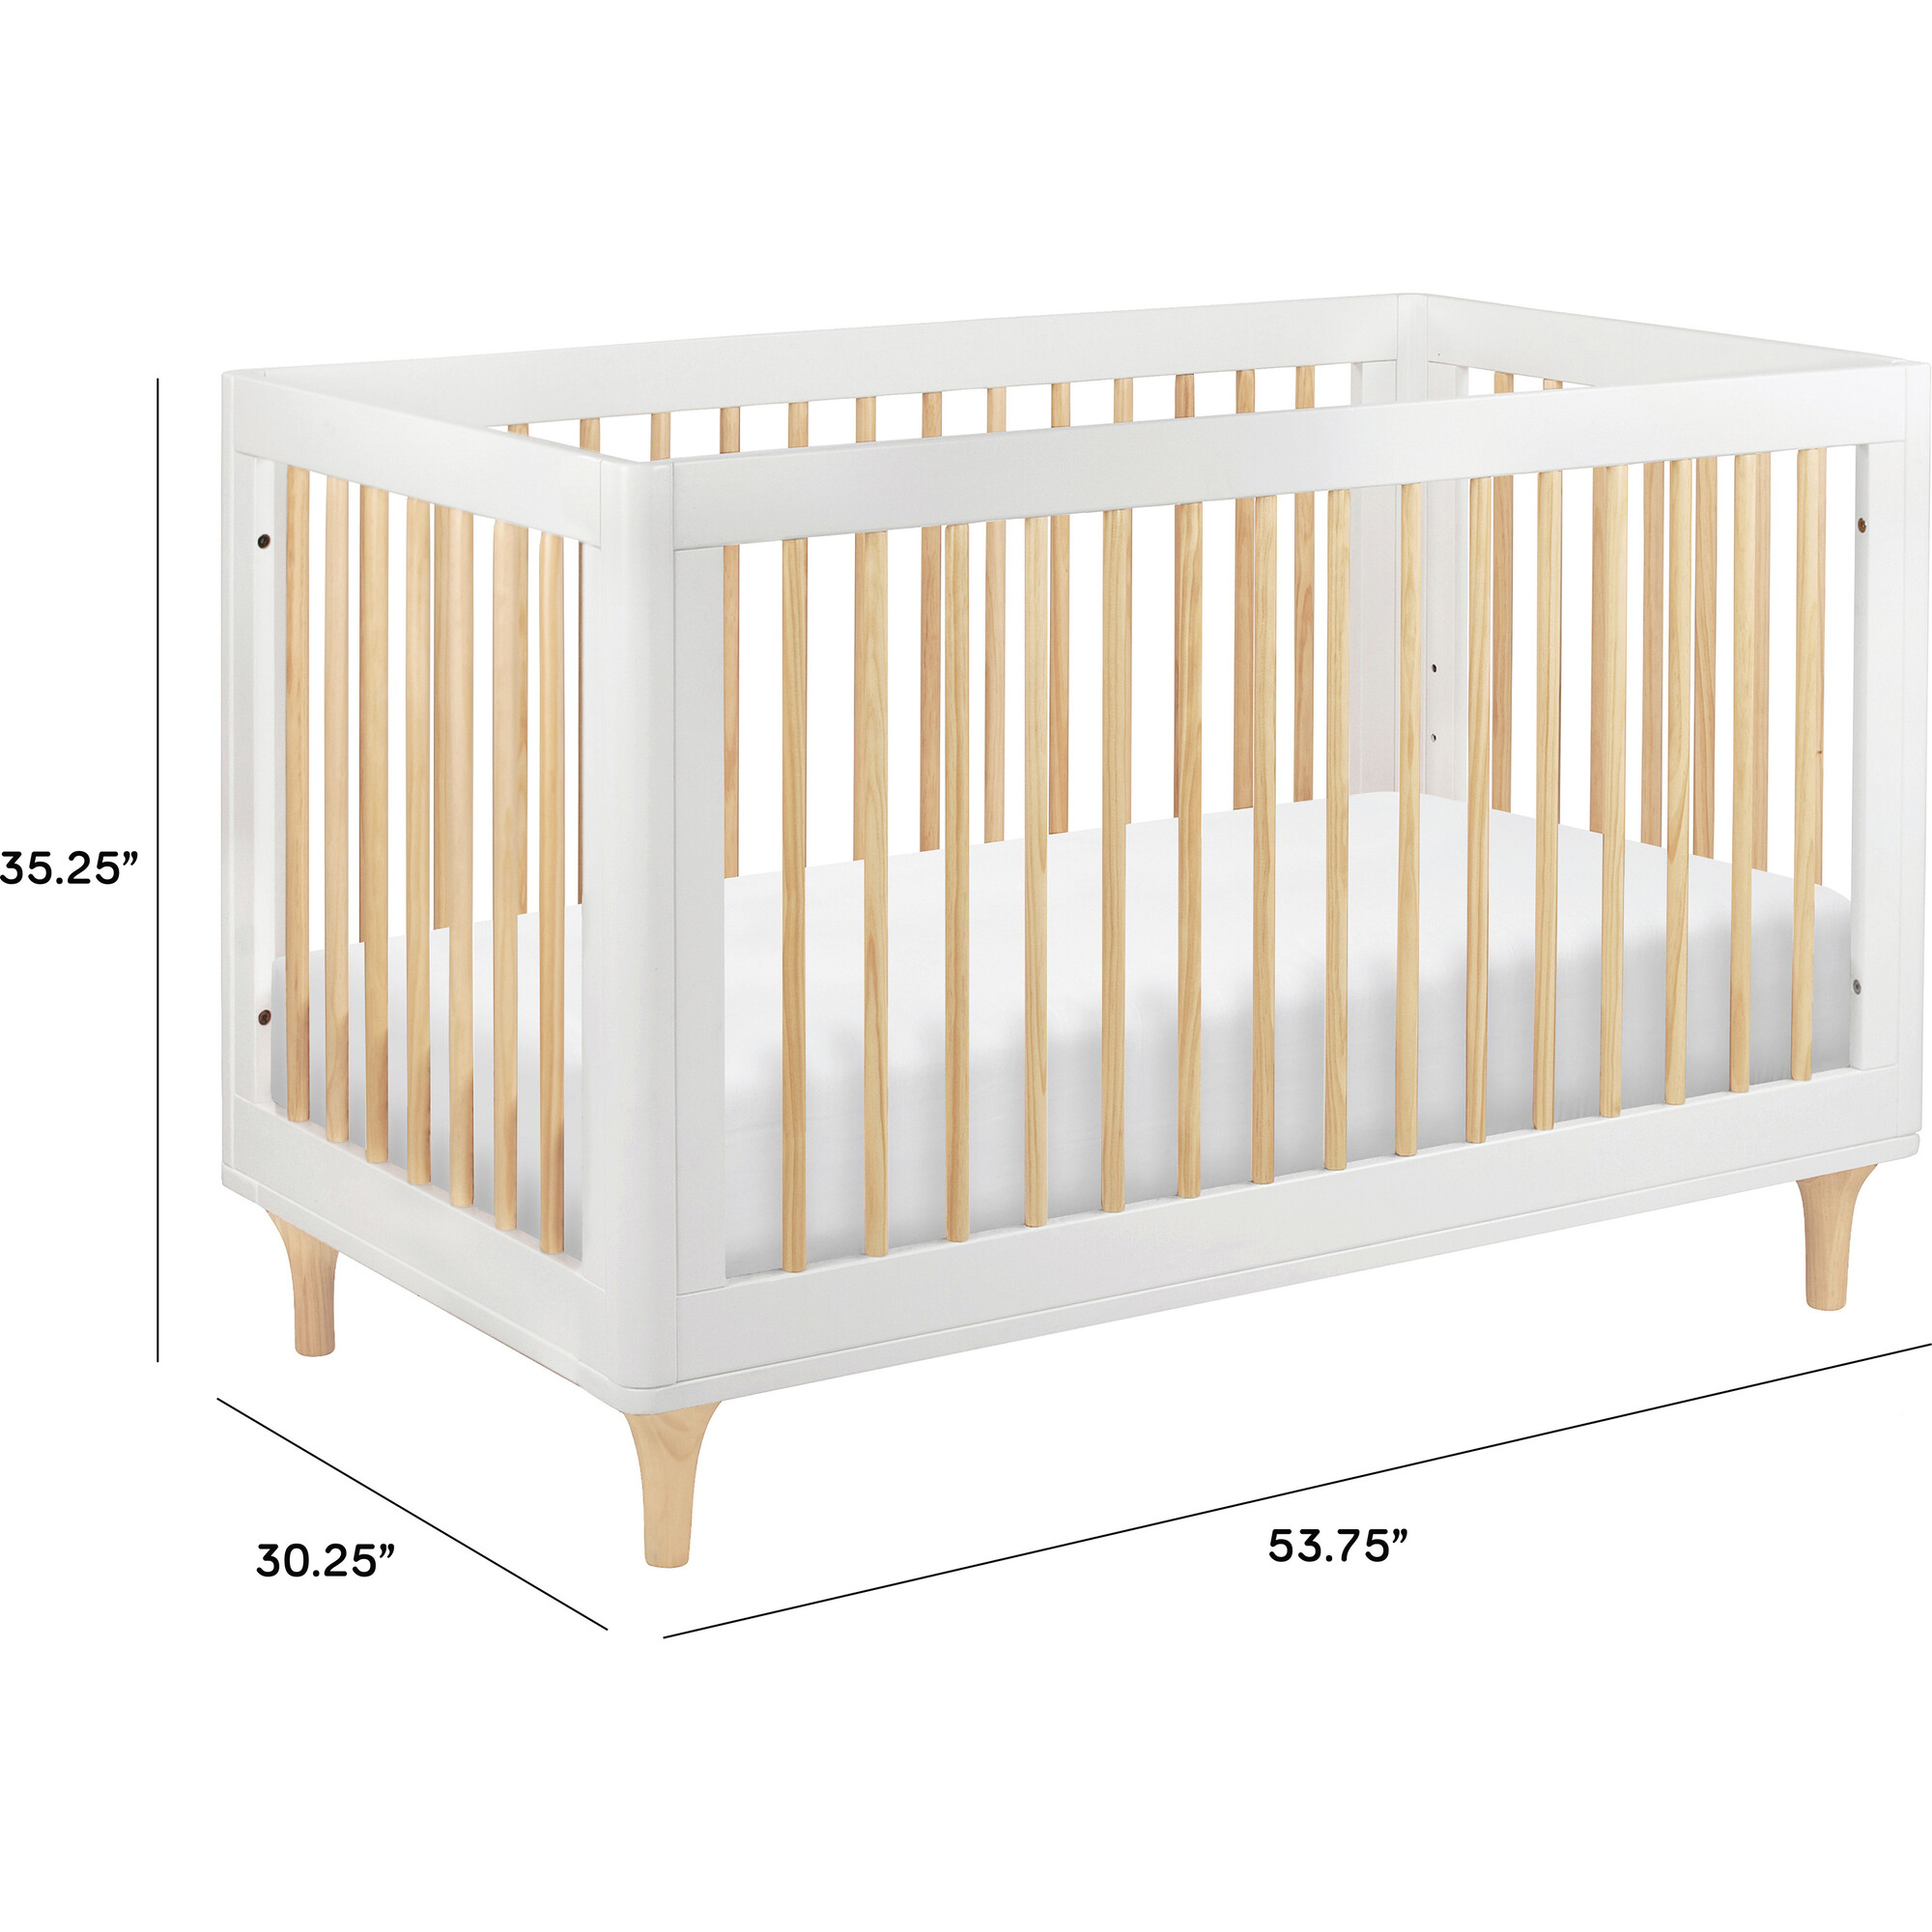 Three Position Adjustable Height Mattress Easily Converts to Toddler Bed Day Bed or Full Bed Mattress Not Included Some Assembly Required Storkcraft Sienna 3-in-1 Convertible Crib White/Natural 